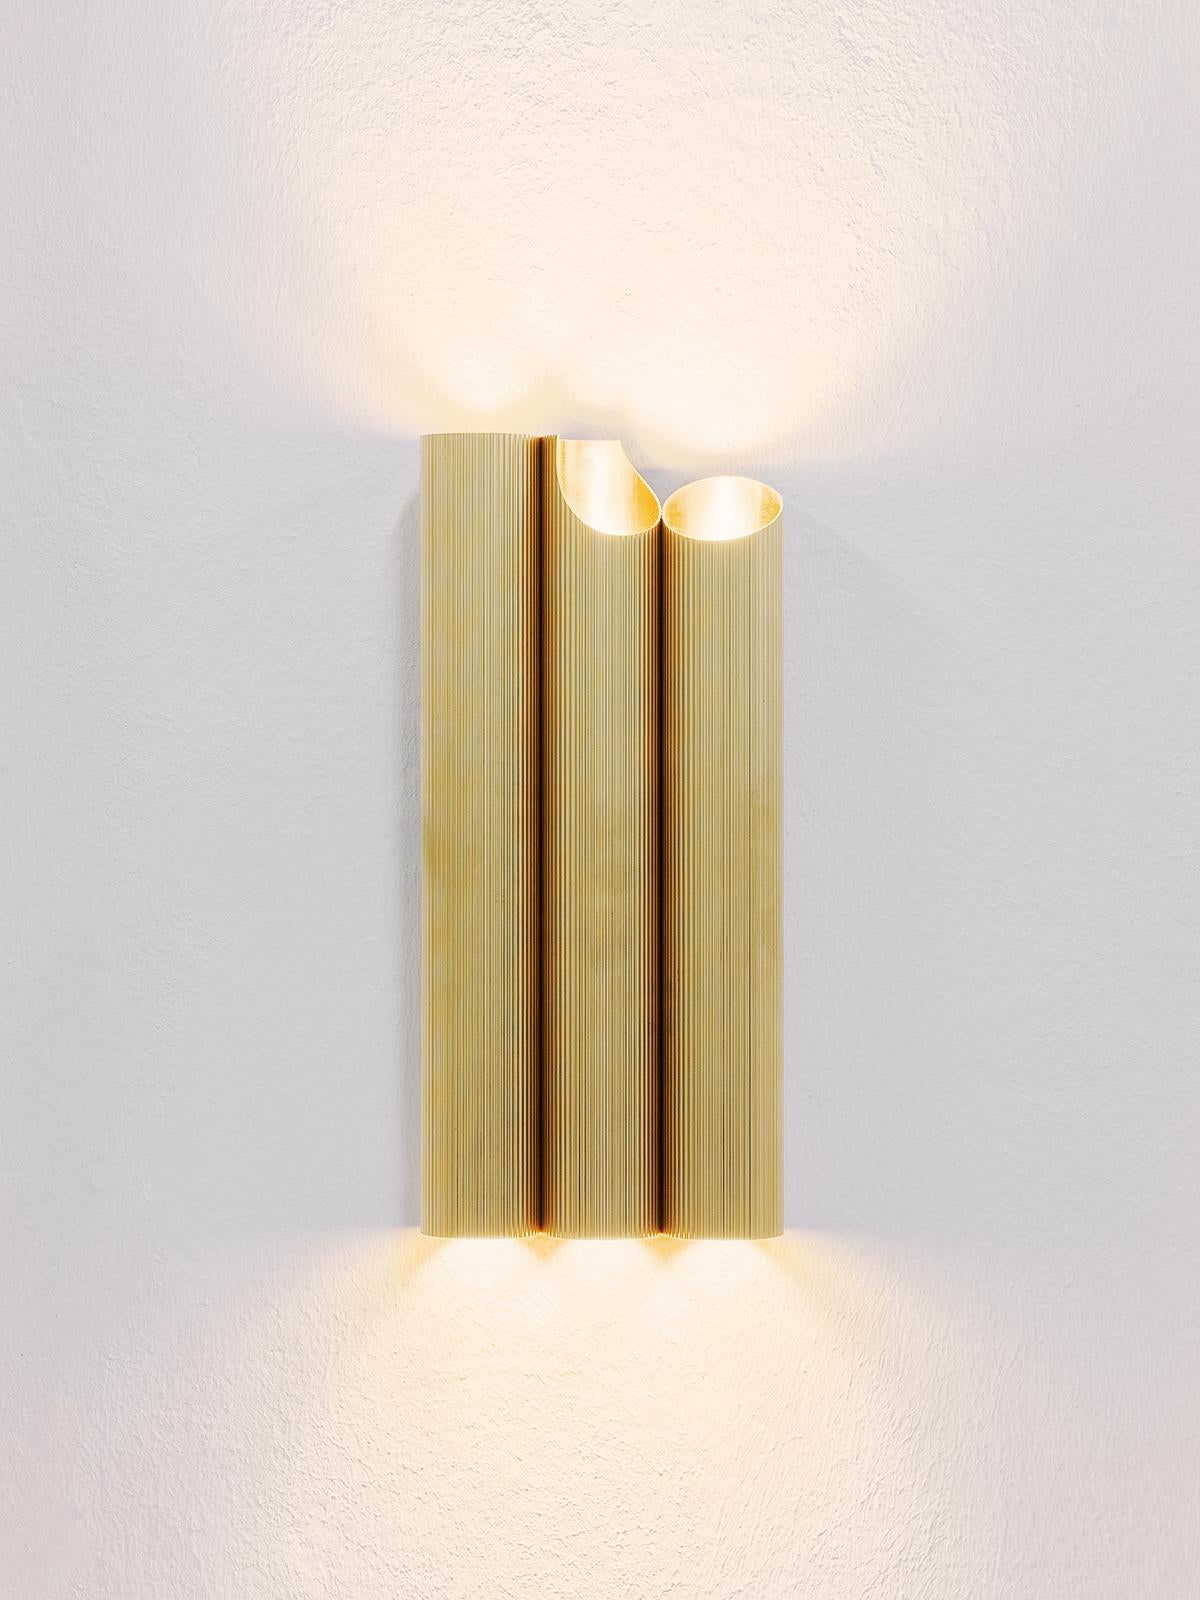 Armilla invites to a relationship with light.
The tubes, like Doric columns, call for a movement around the object, in a mutual exchange between points of view and reflected rays.

We have designed an alphabet of details to bring light through